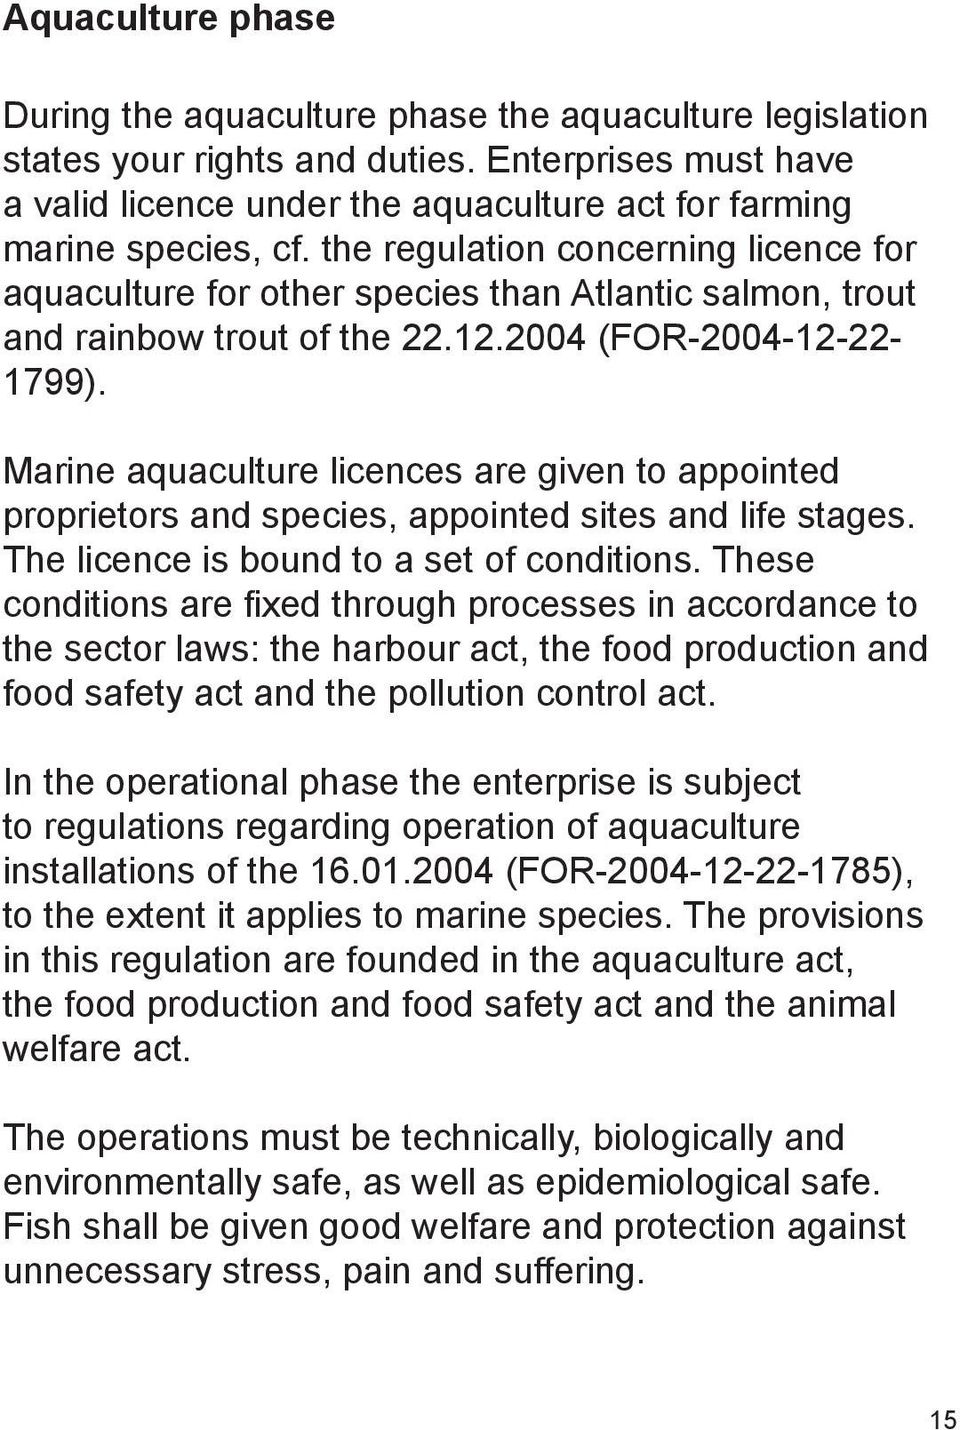 the regulation concerning licence for aquaculture for other species than Atlantic salmon, trout and rainbow trout of the 22.12.2004 (FOR-2004-12-22-1799).